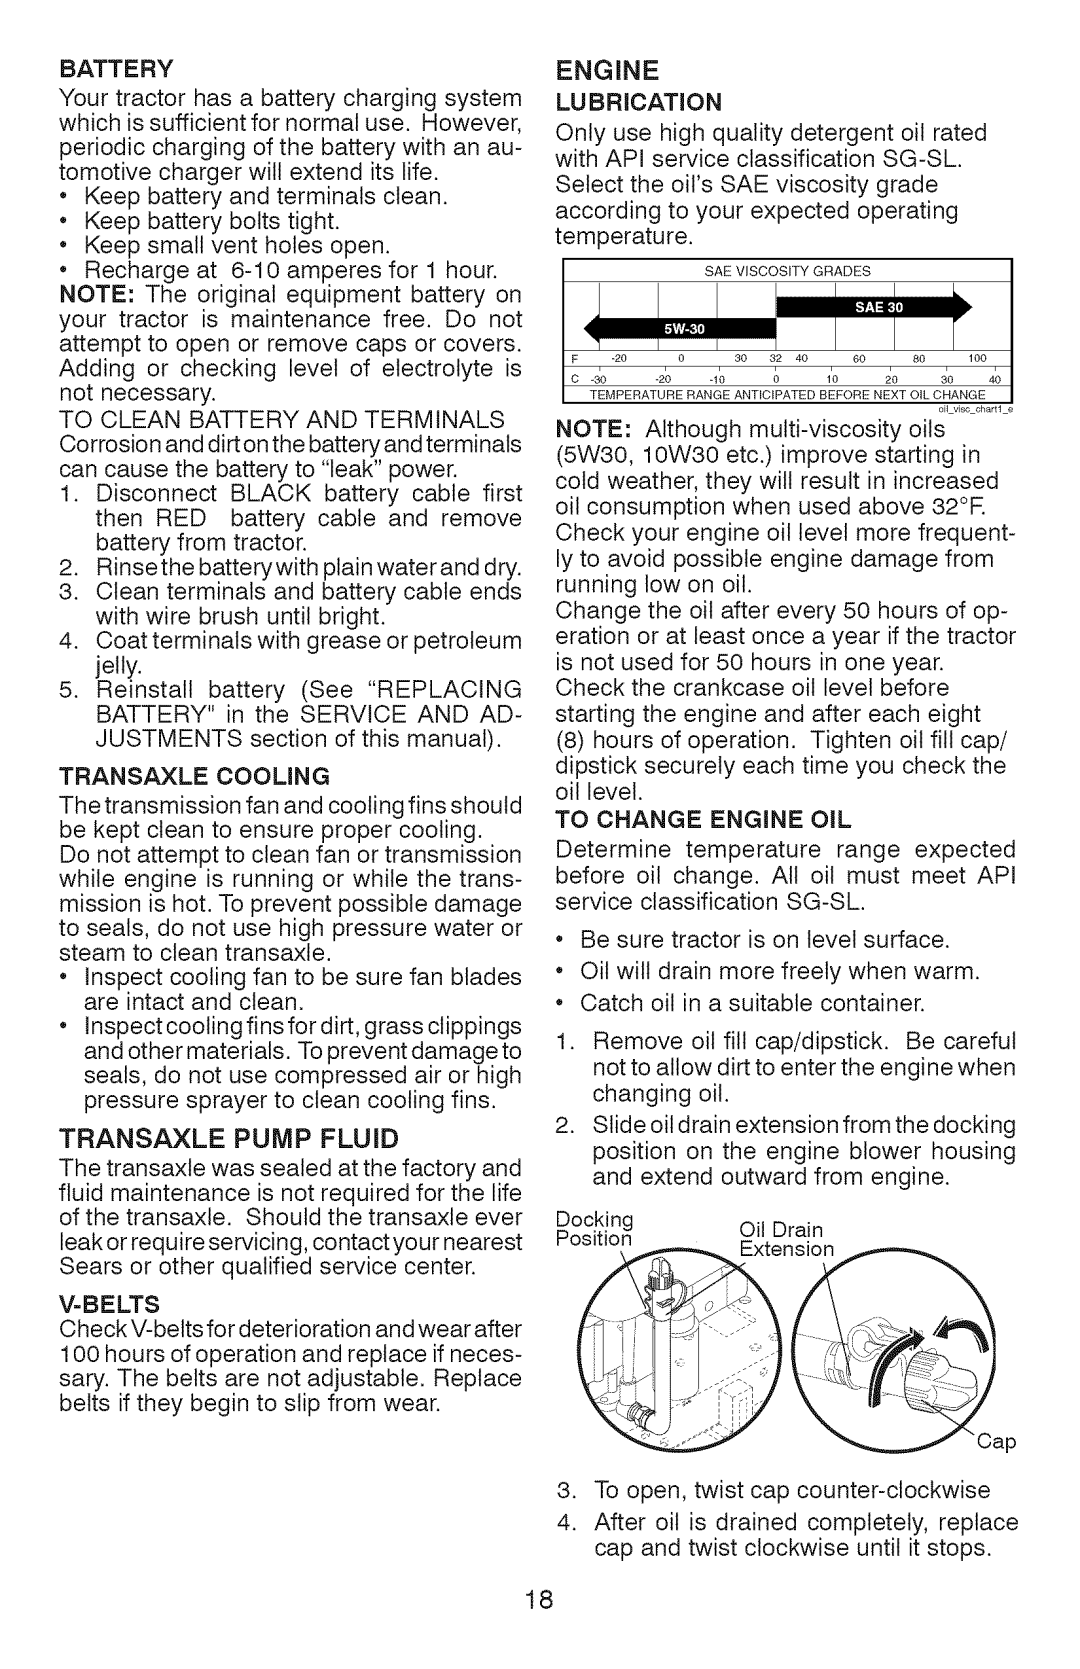 Craftsman 917.289360, YT 4000 owner manual Battery, Transaxle Cooling, Transaxle Pump Fluid, TO CHANGE ENGINE OiL 